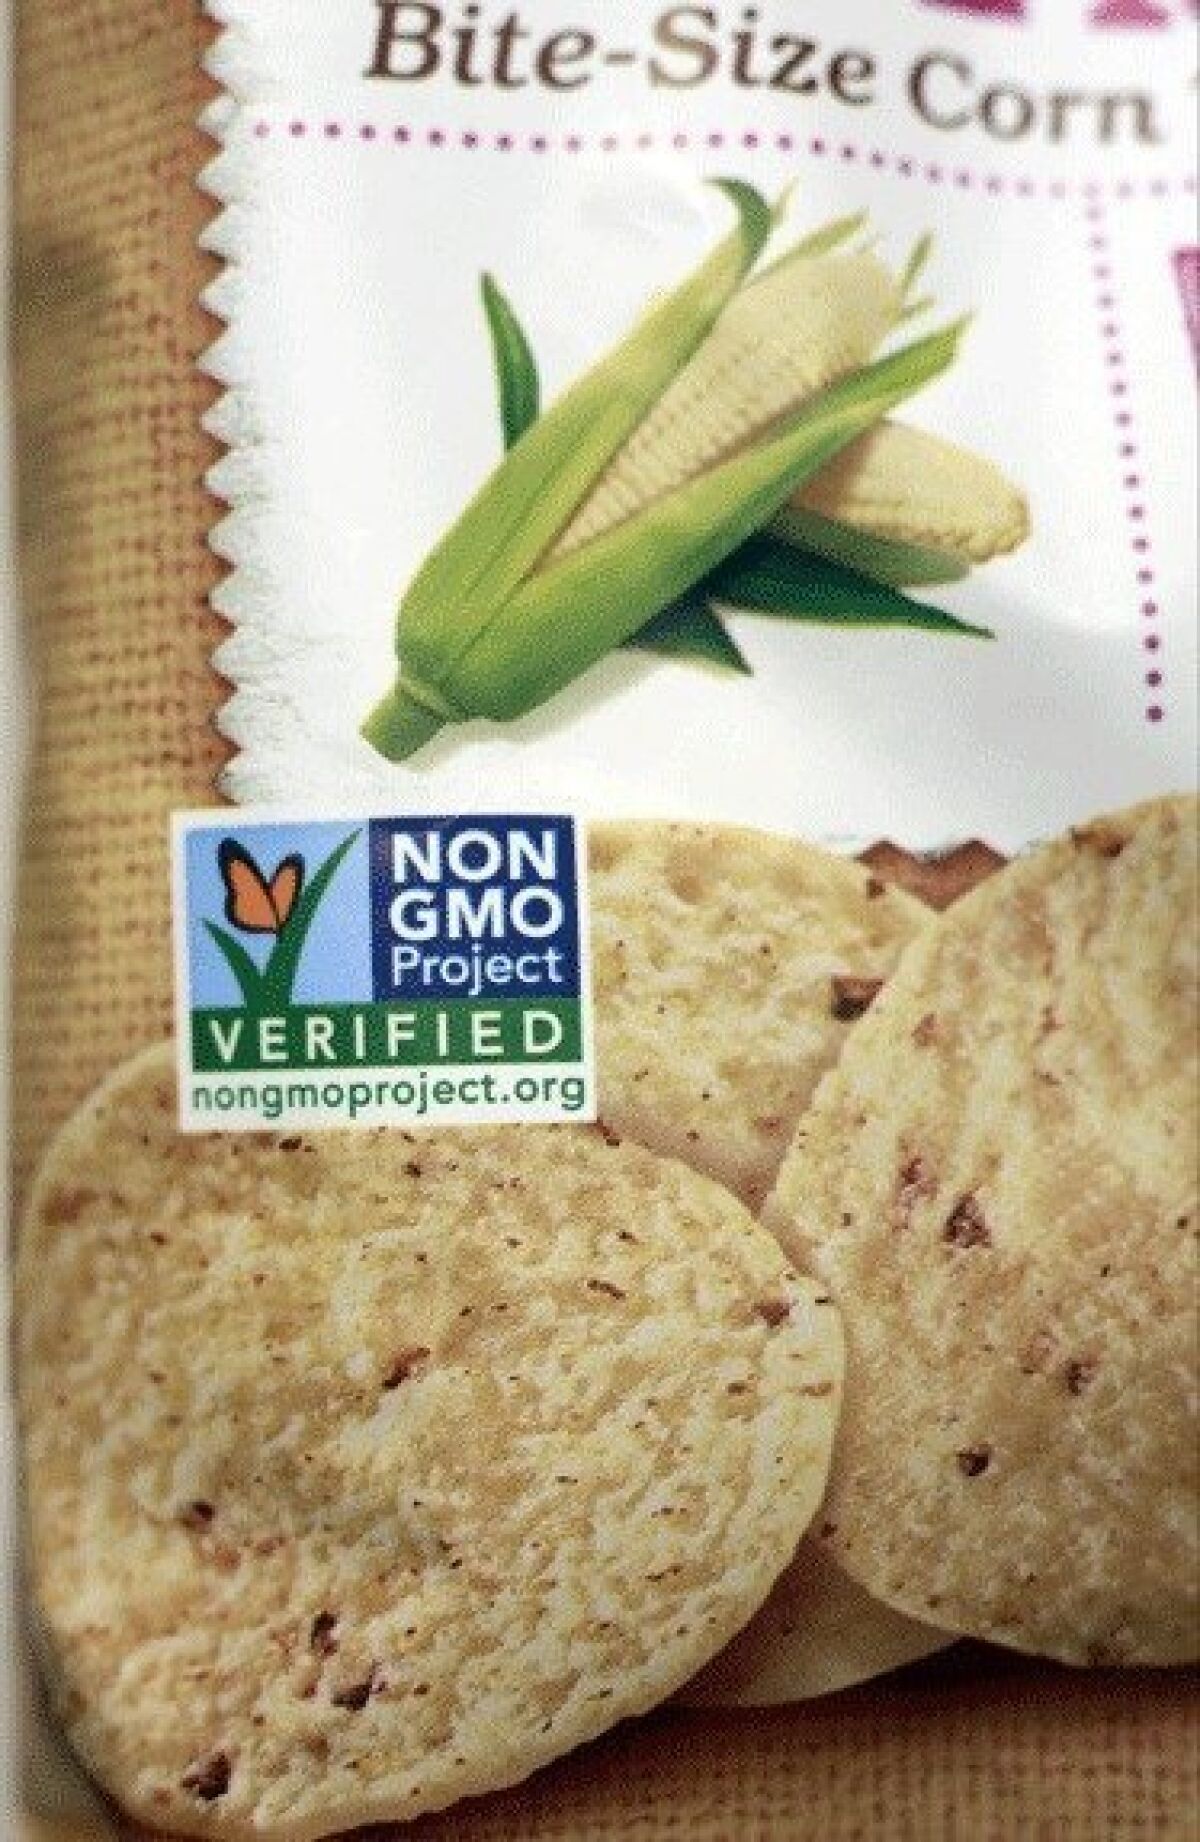 A product labeled with Non Genetically Modified Organism (GMO) is sold at the Lassens Natural Foods & Vitamins store in Los Feliz. International food and chemical conglomerates are spending millions to defeat California's Proposition 37, which would require labeling on all food made with altered genetic material. It also would prohibit labeling or advertising such food as "natural."